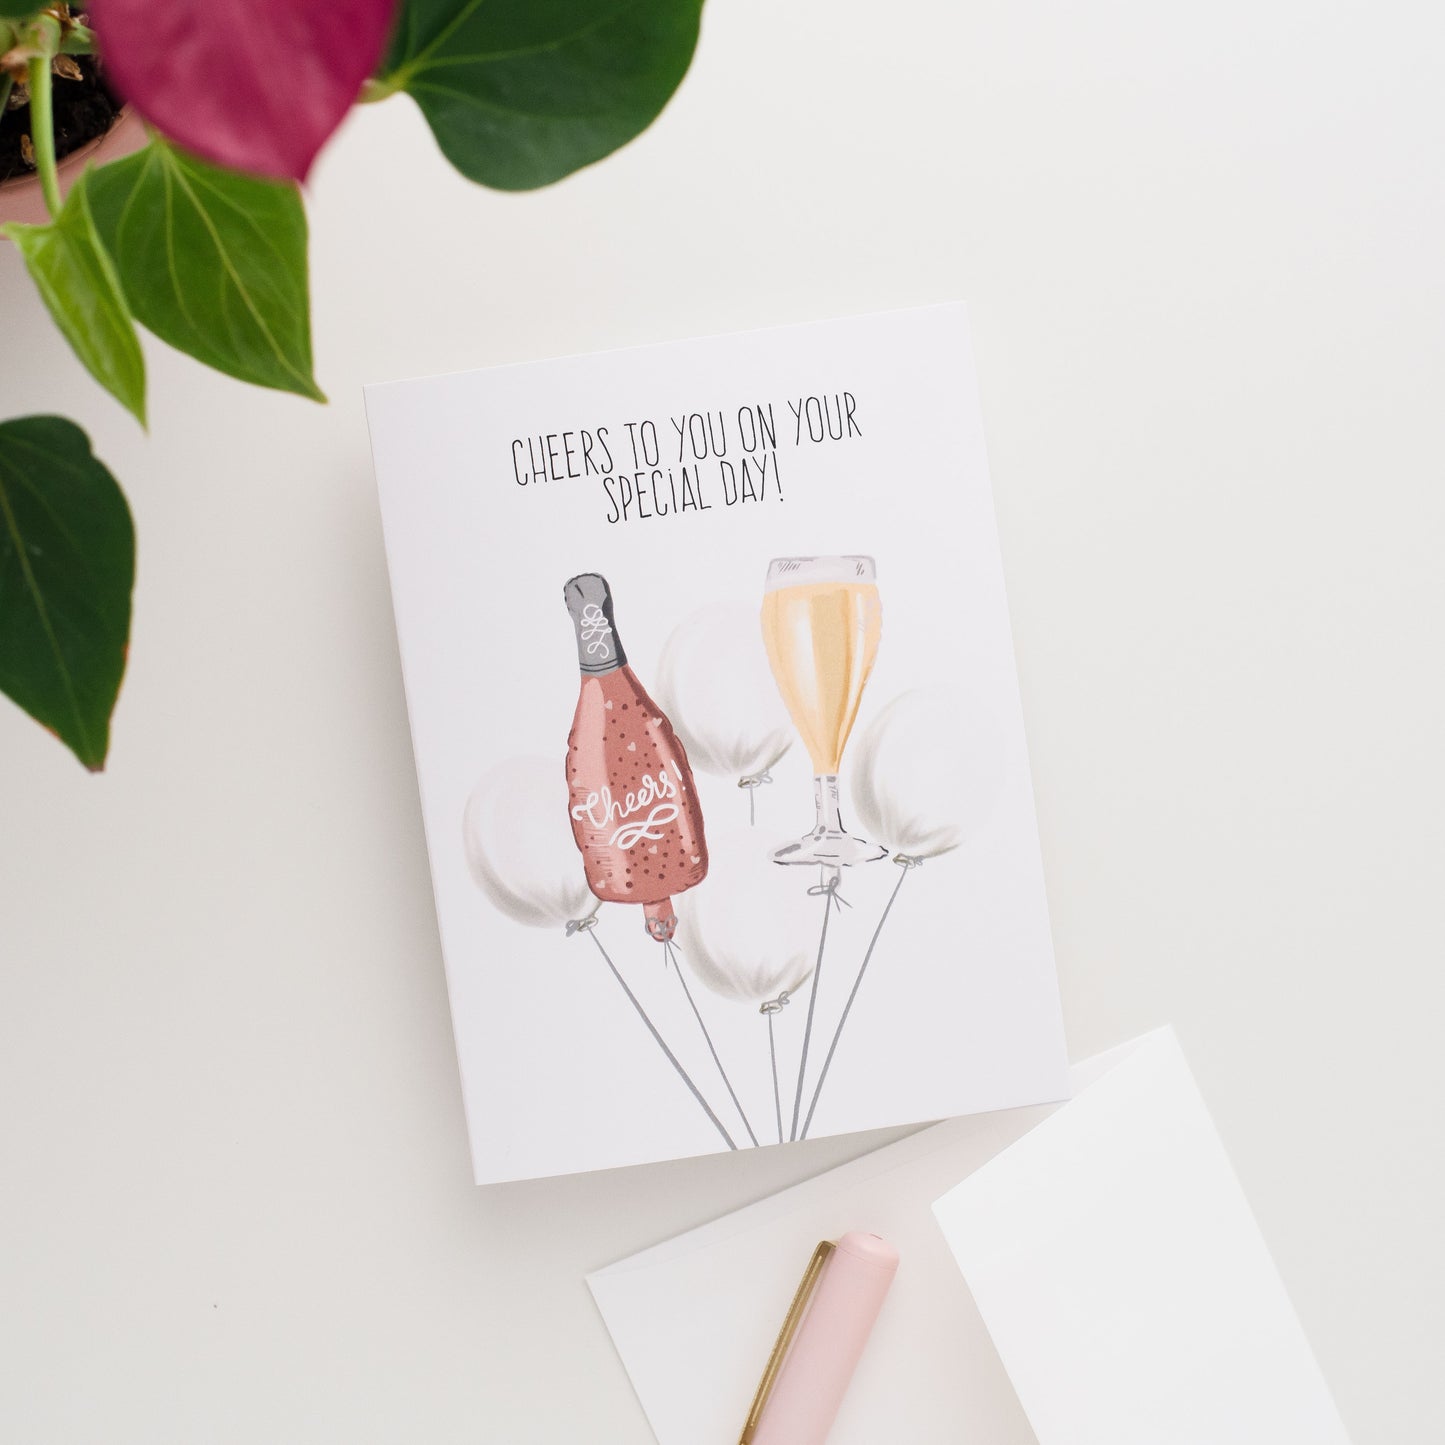 Cheers To You On Your Special Day! - Greeting Card